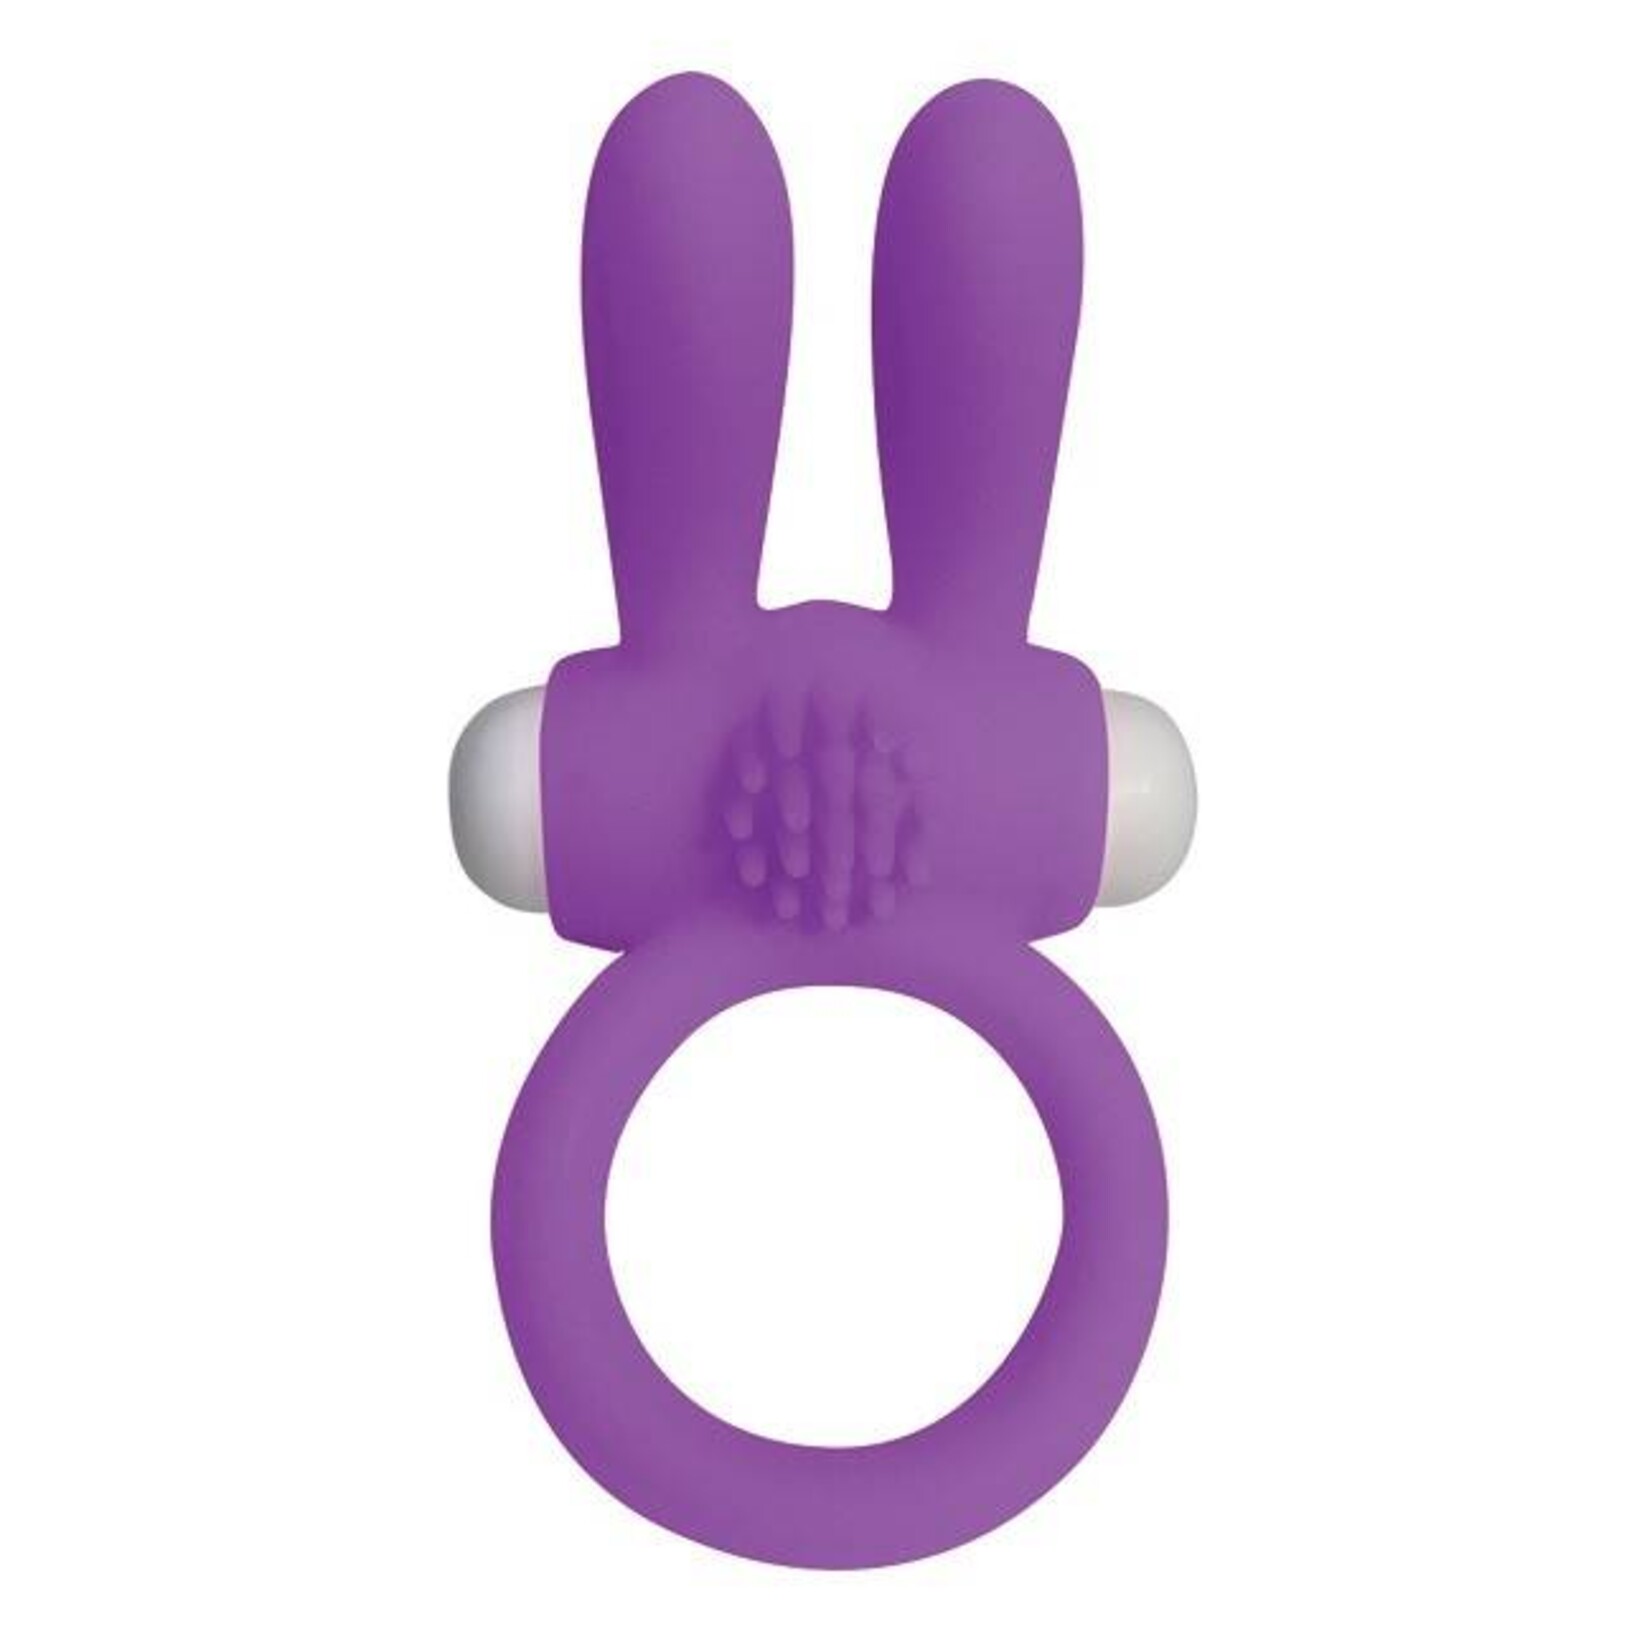 Neon Luv Touch Neon Rabbit Ring